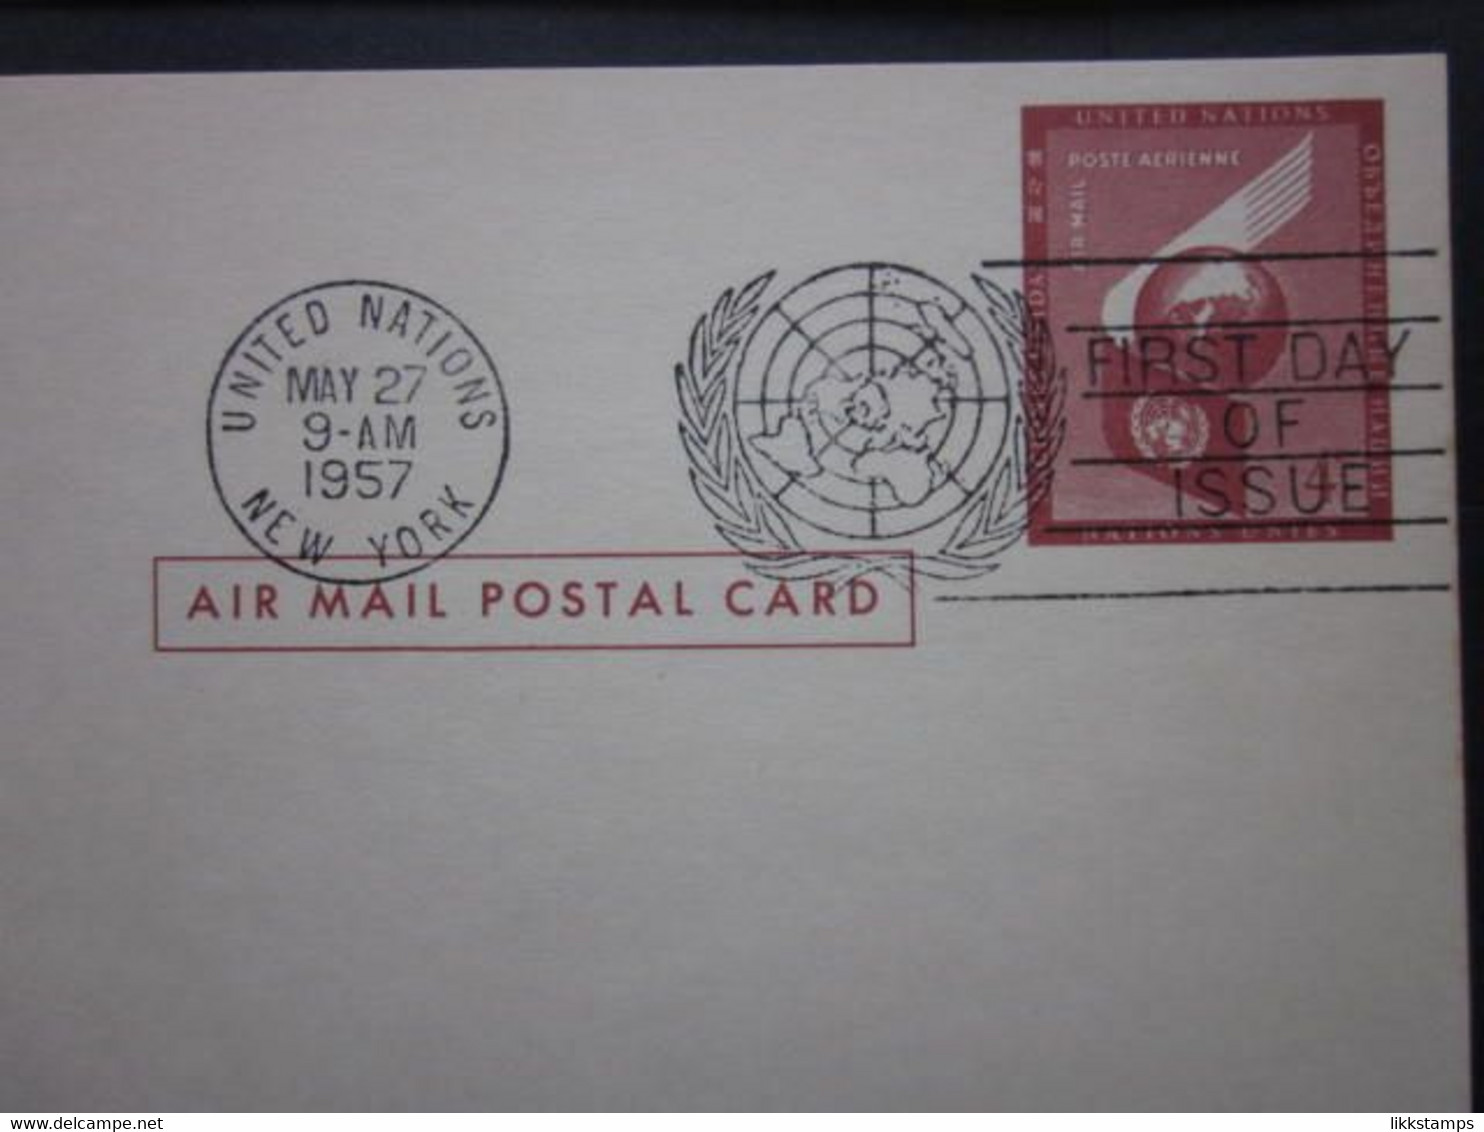 A GROUP OF FIVE 1950's UNITED NATIONS POSTAL CARDS WITH FIRST DAY OF ISSUE POSTMARKS. ( 02225 ) - Covers & Documents